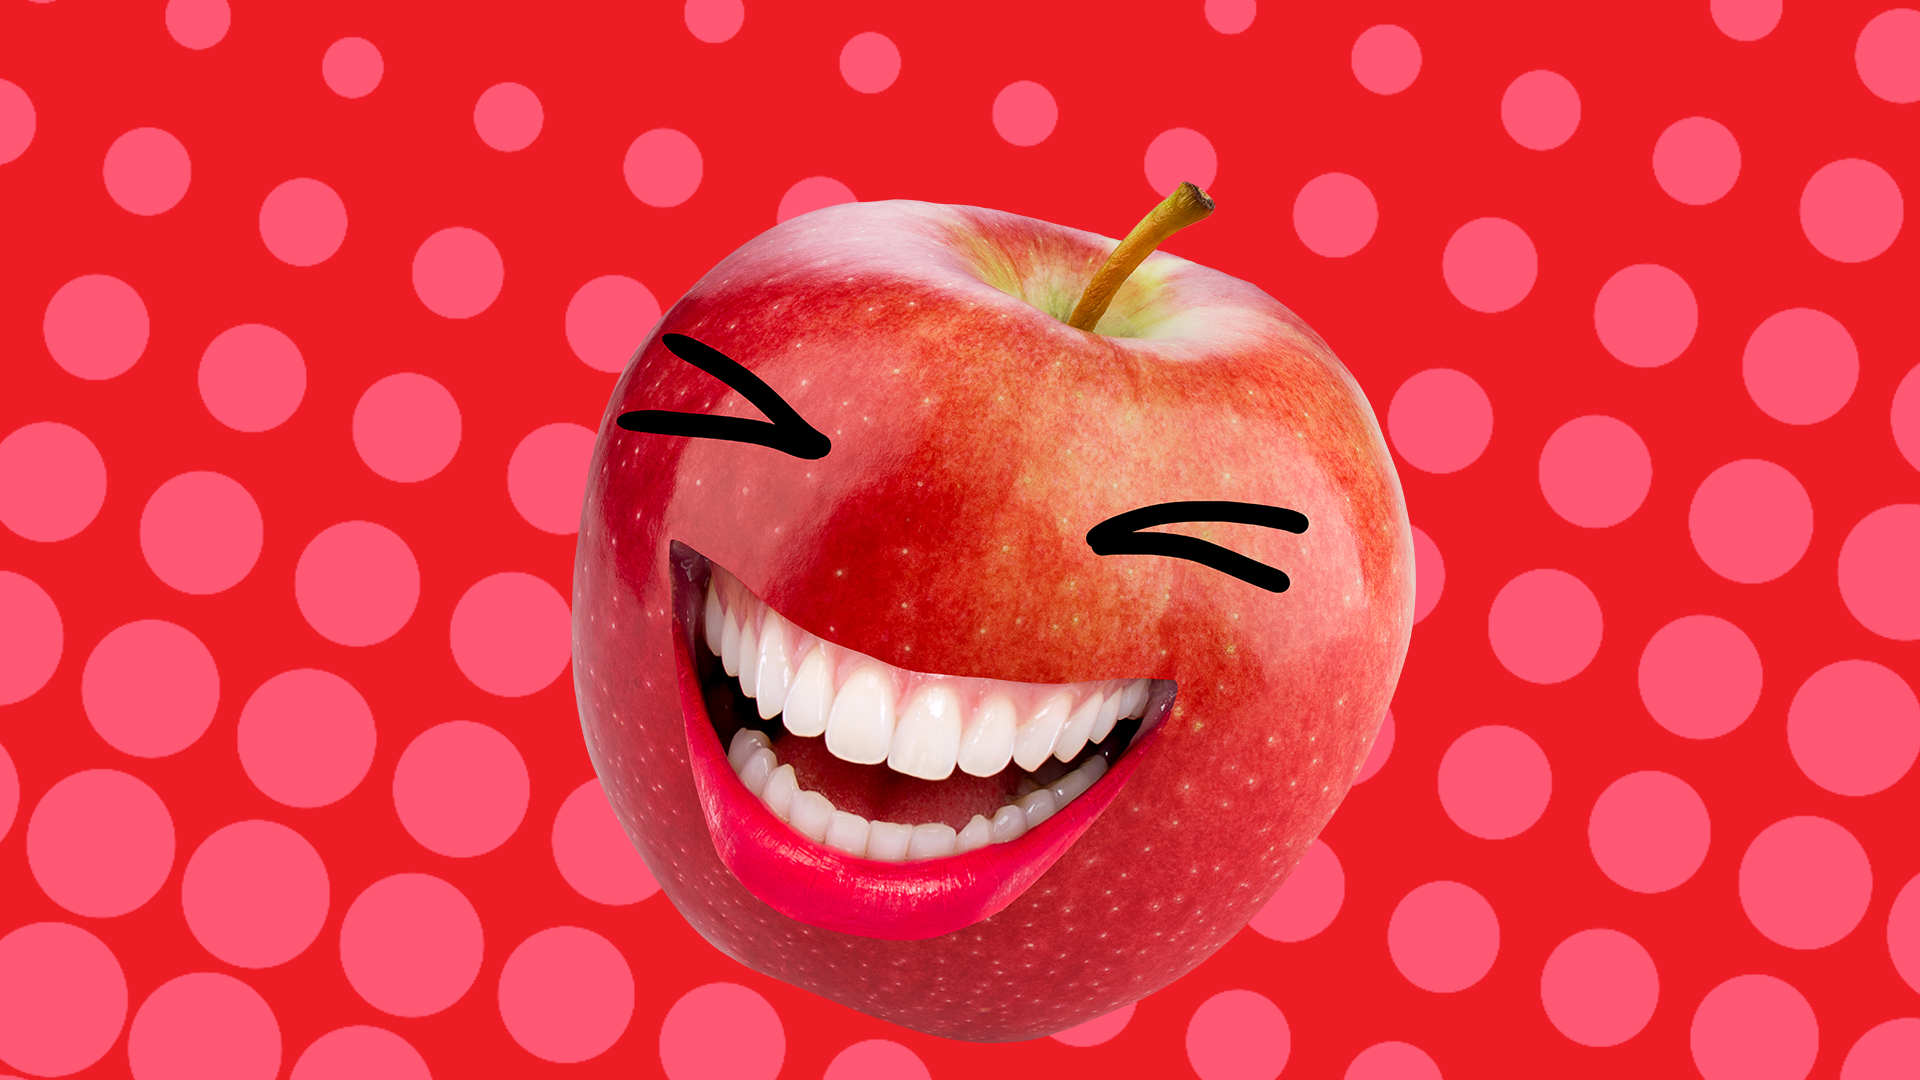 Laughing apple on red background